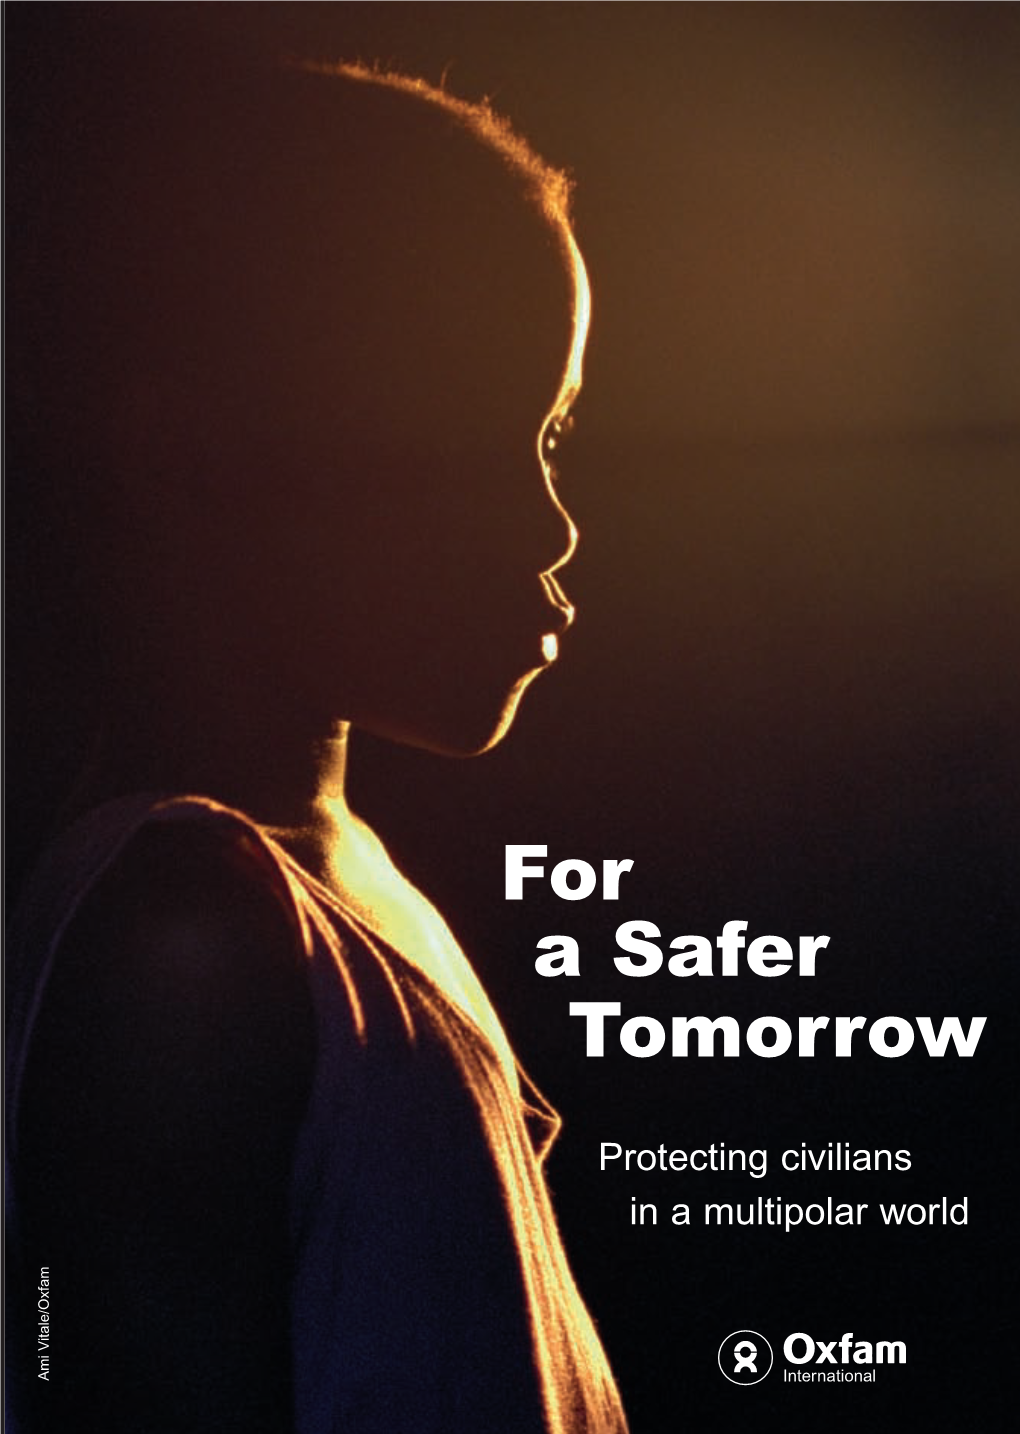 For a Safer Tomorrow Protecting Civilians in a Multipolar World Oxfam Ireland, Món Oxfam (Spain), Tional 2008 Na Ong, Inter Acterises Modern Warfare